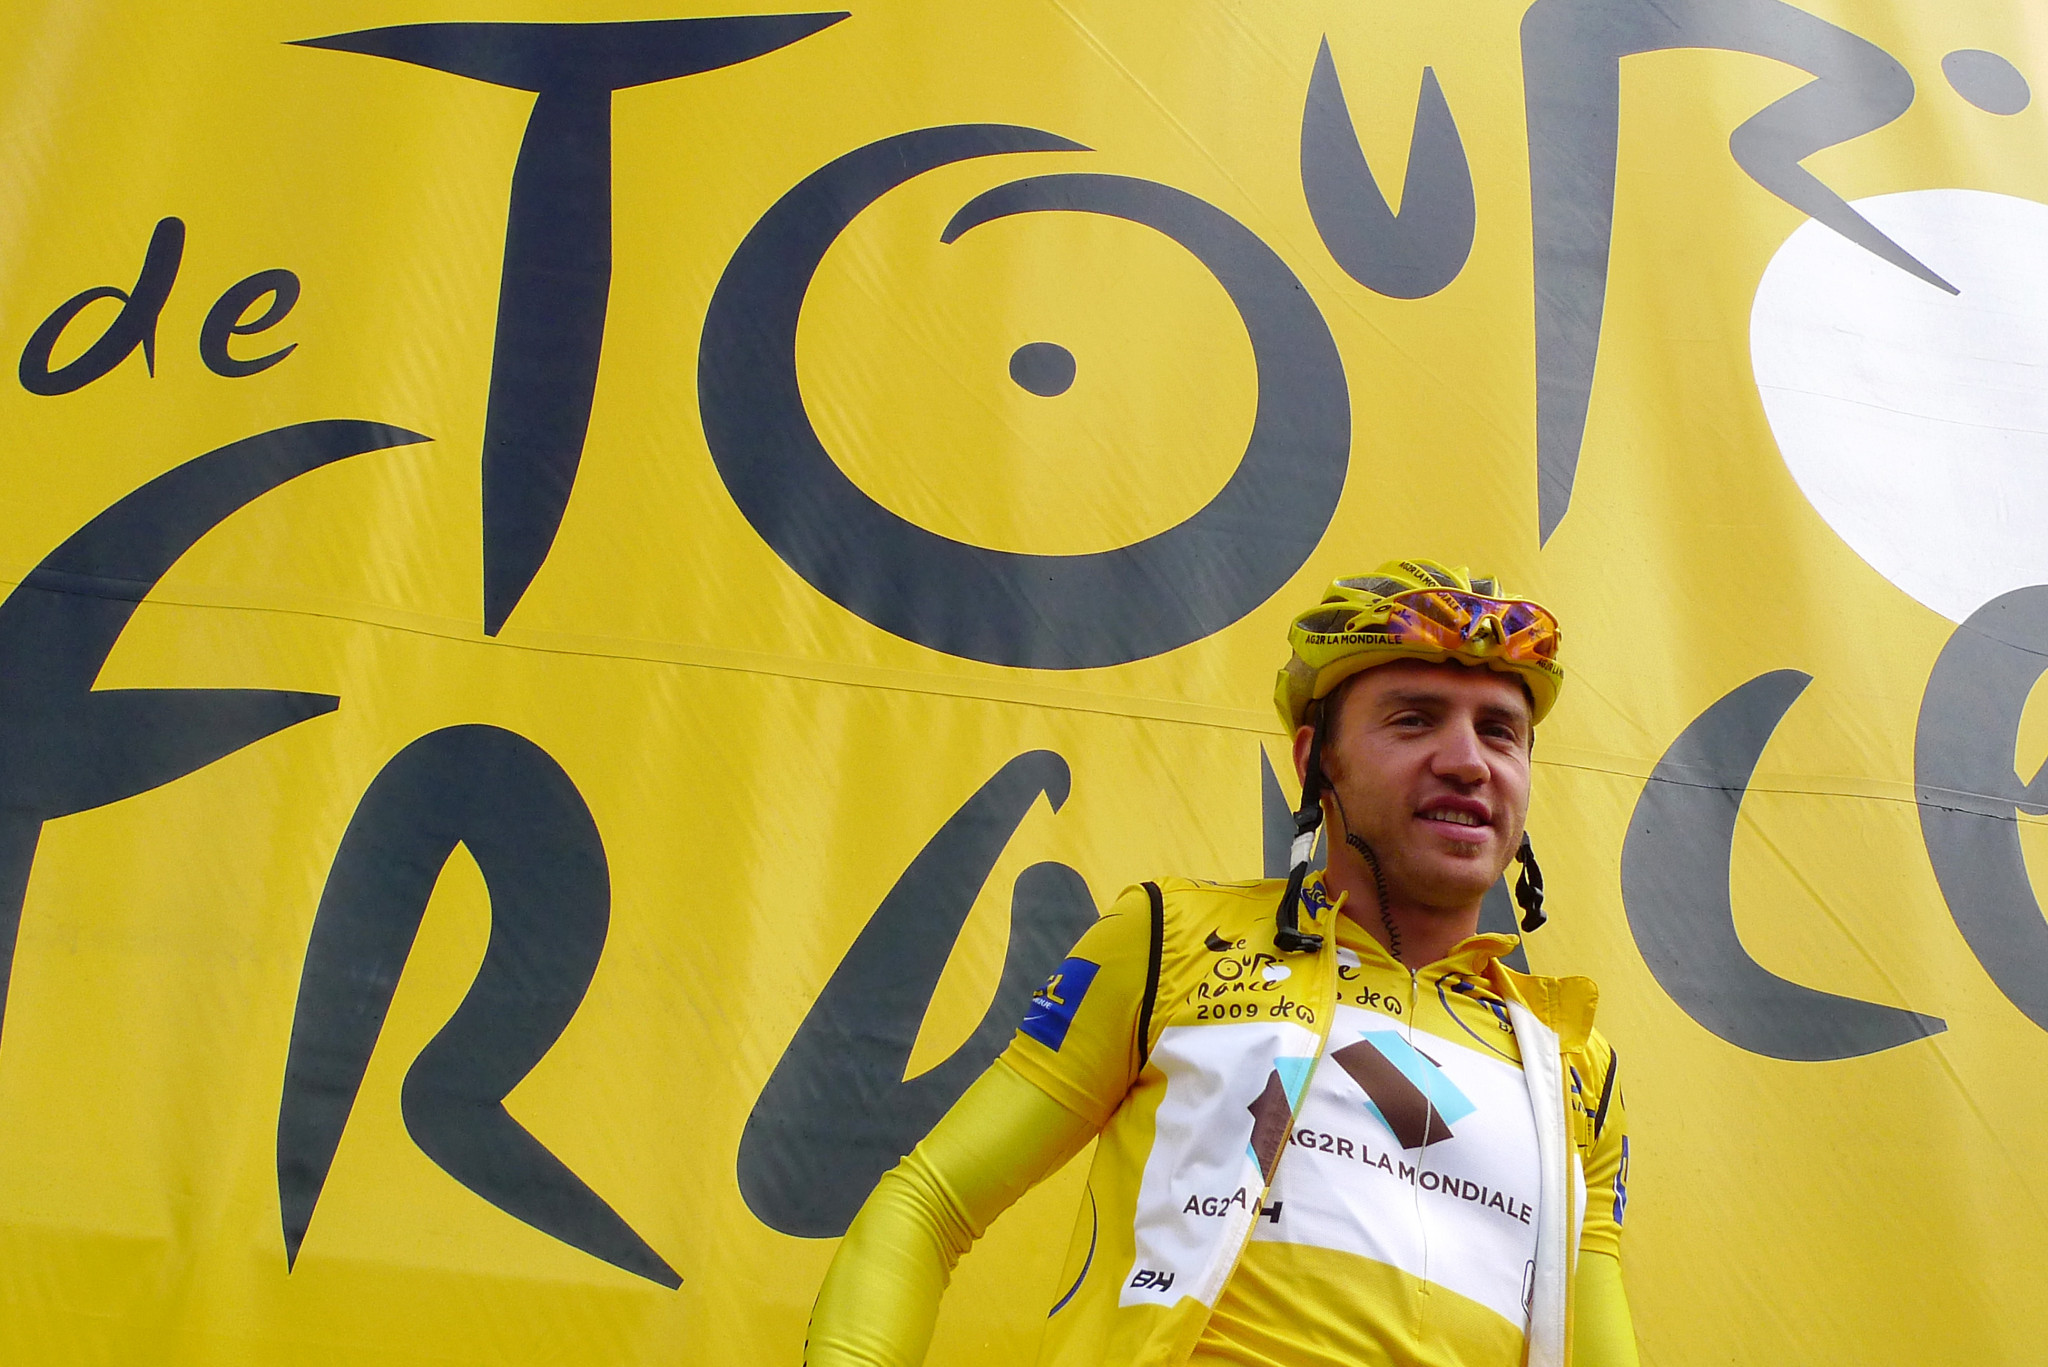 Rinaldo Nocentini led the Tour de France for eight stages in 2009 ©Getty Images